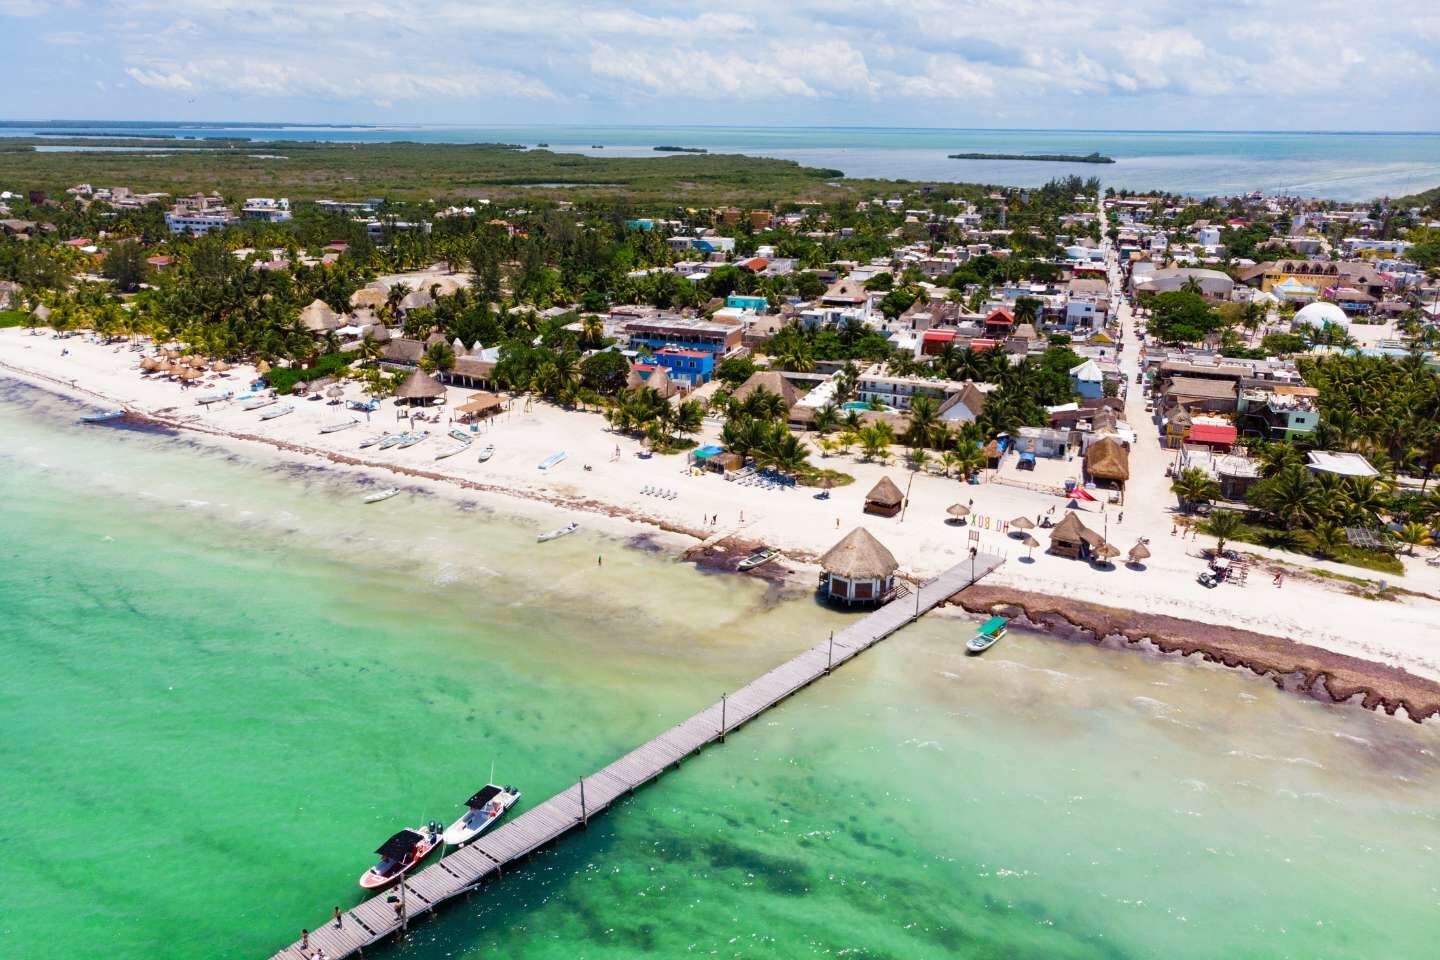 An aerial view of Isla Holbox in Mexico